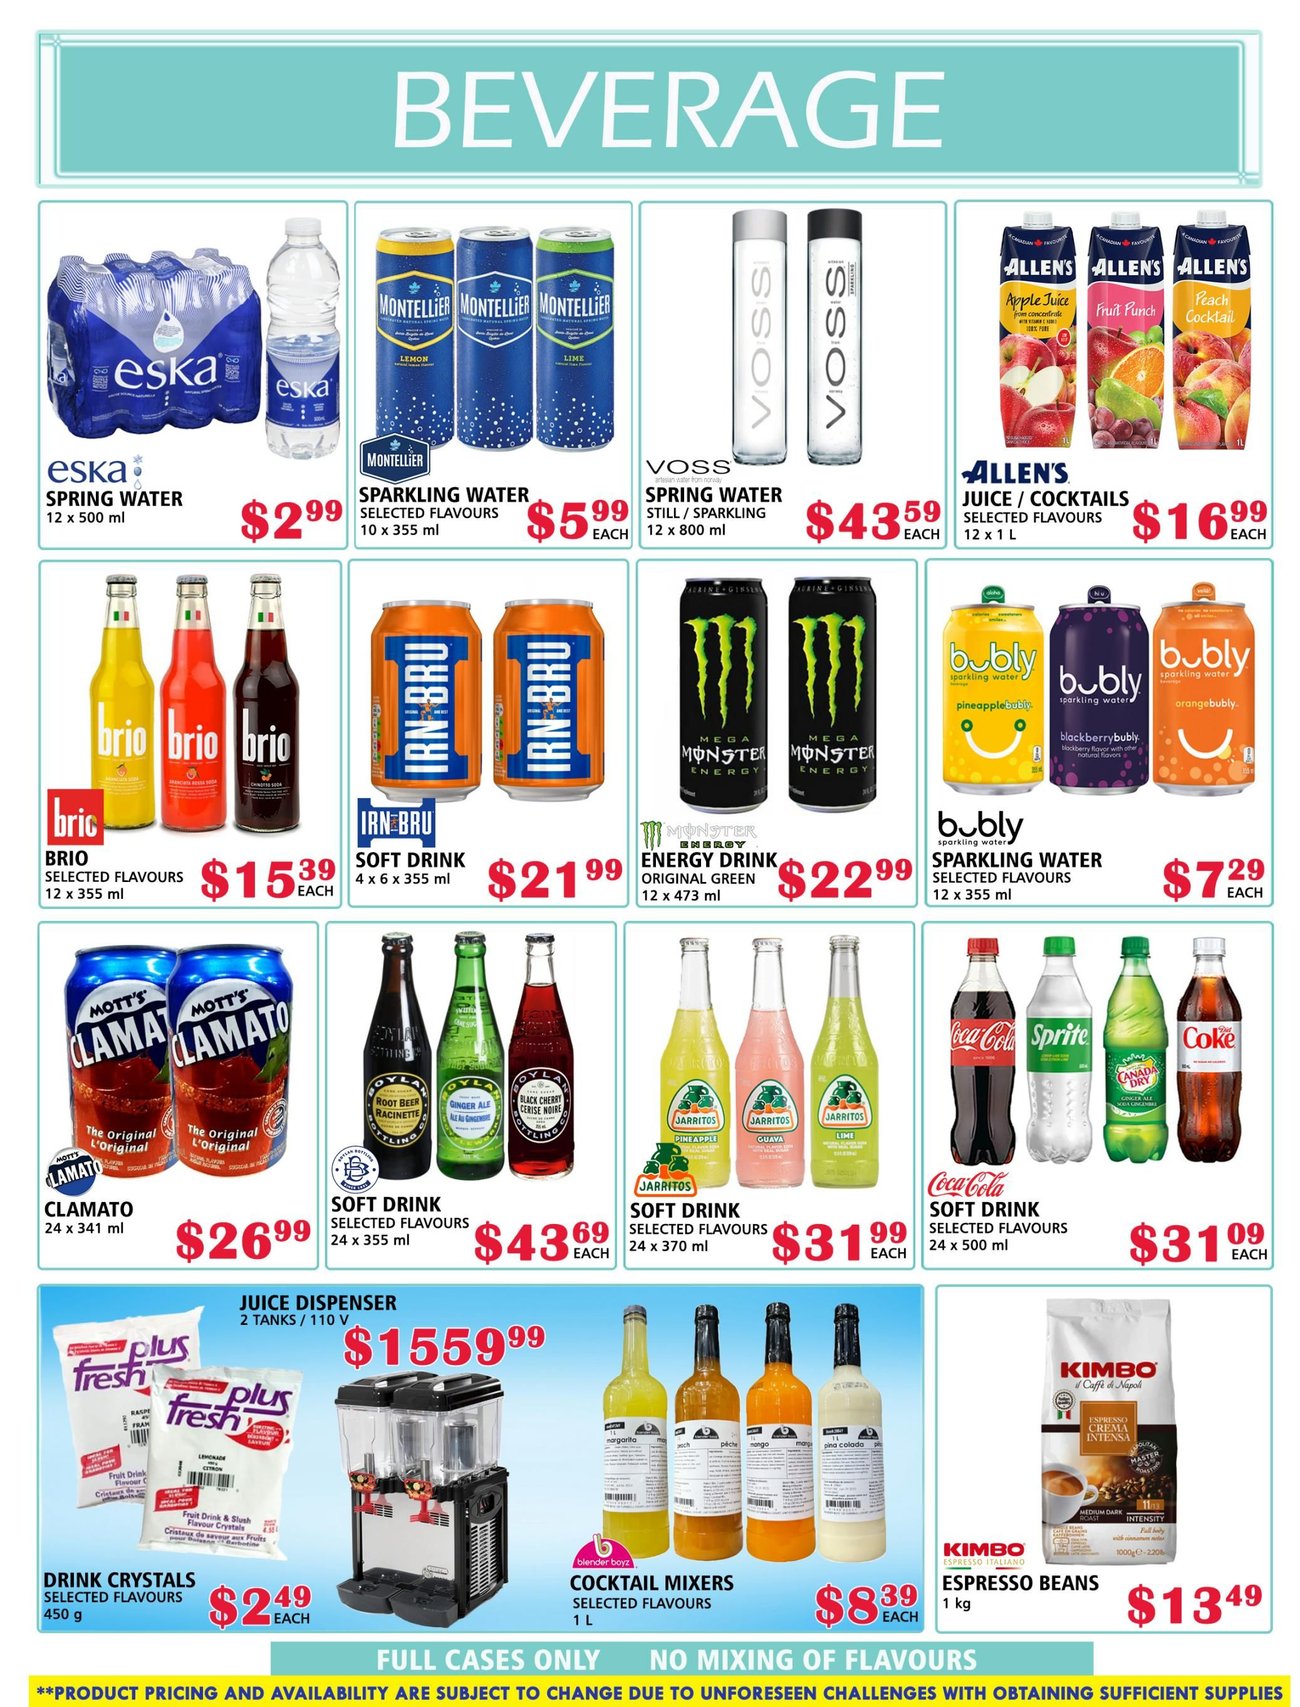 MVR Cash and Carry - Monthly Specials - Page 2